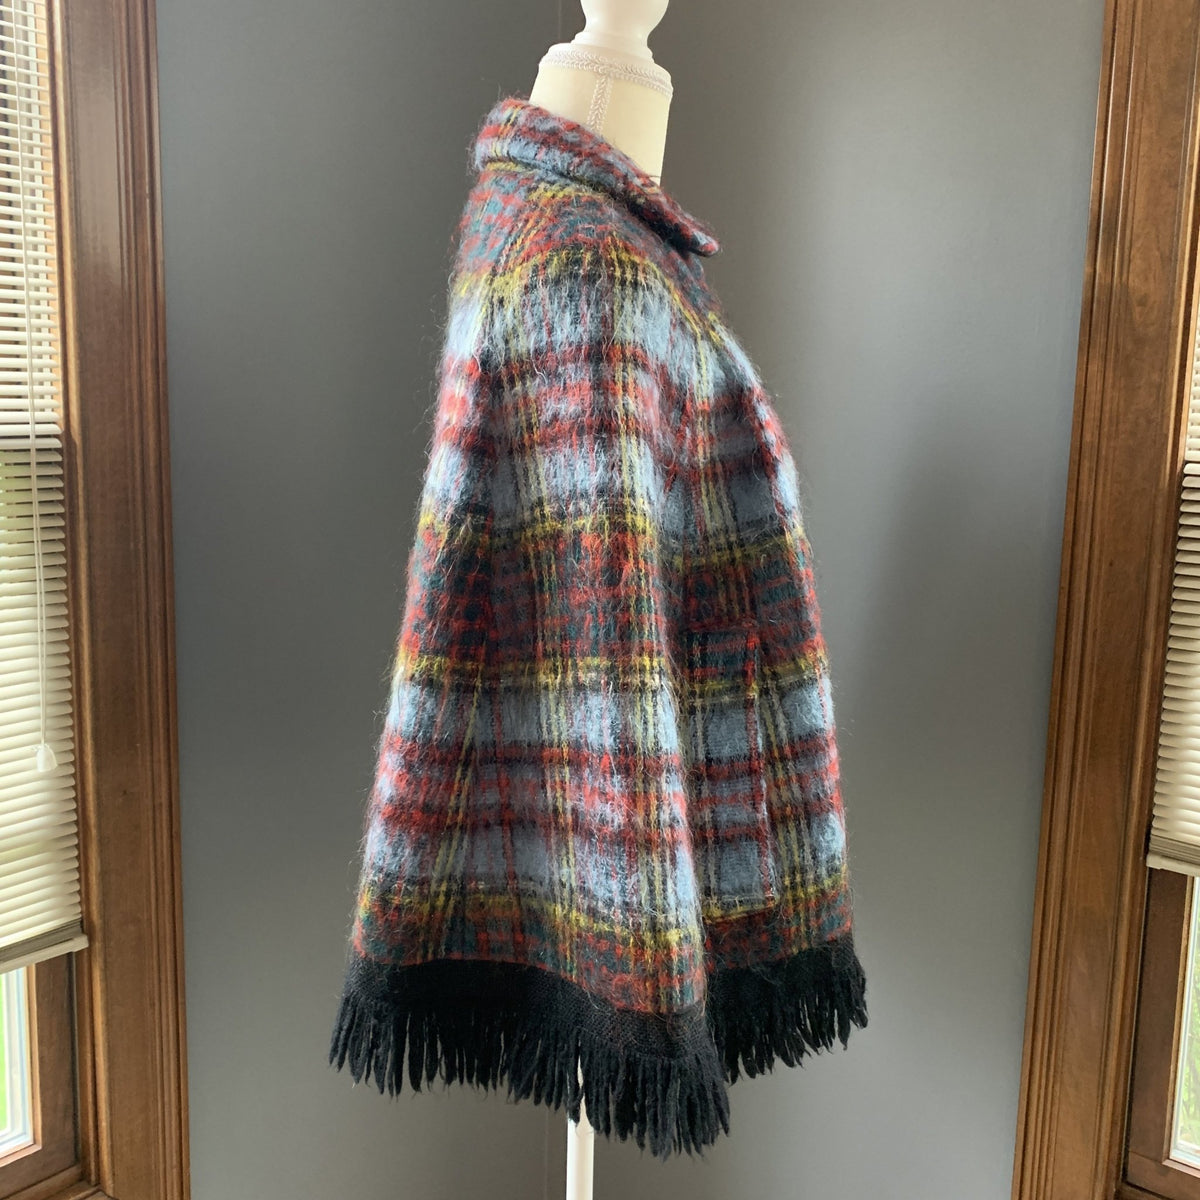 Vintage Mohair Wool Poncho or Jacket in Blue and Red Plaid from Strath